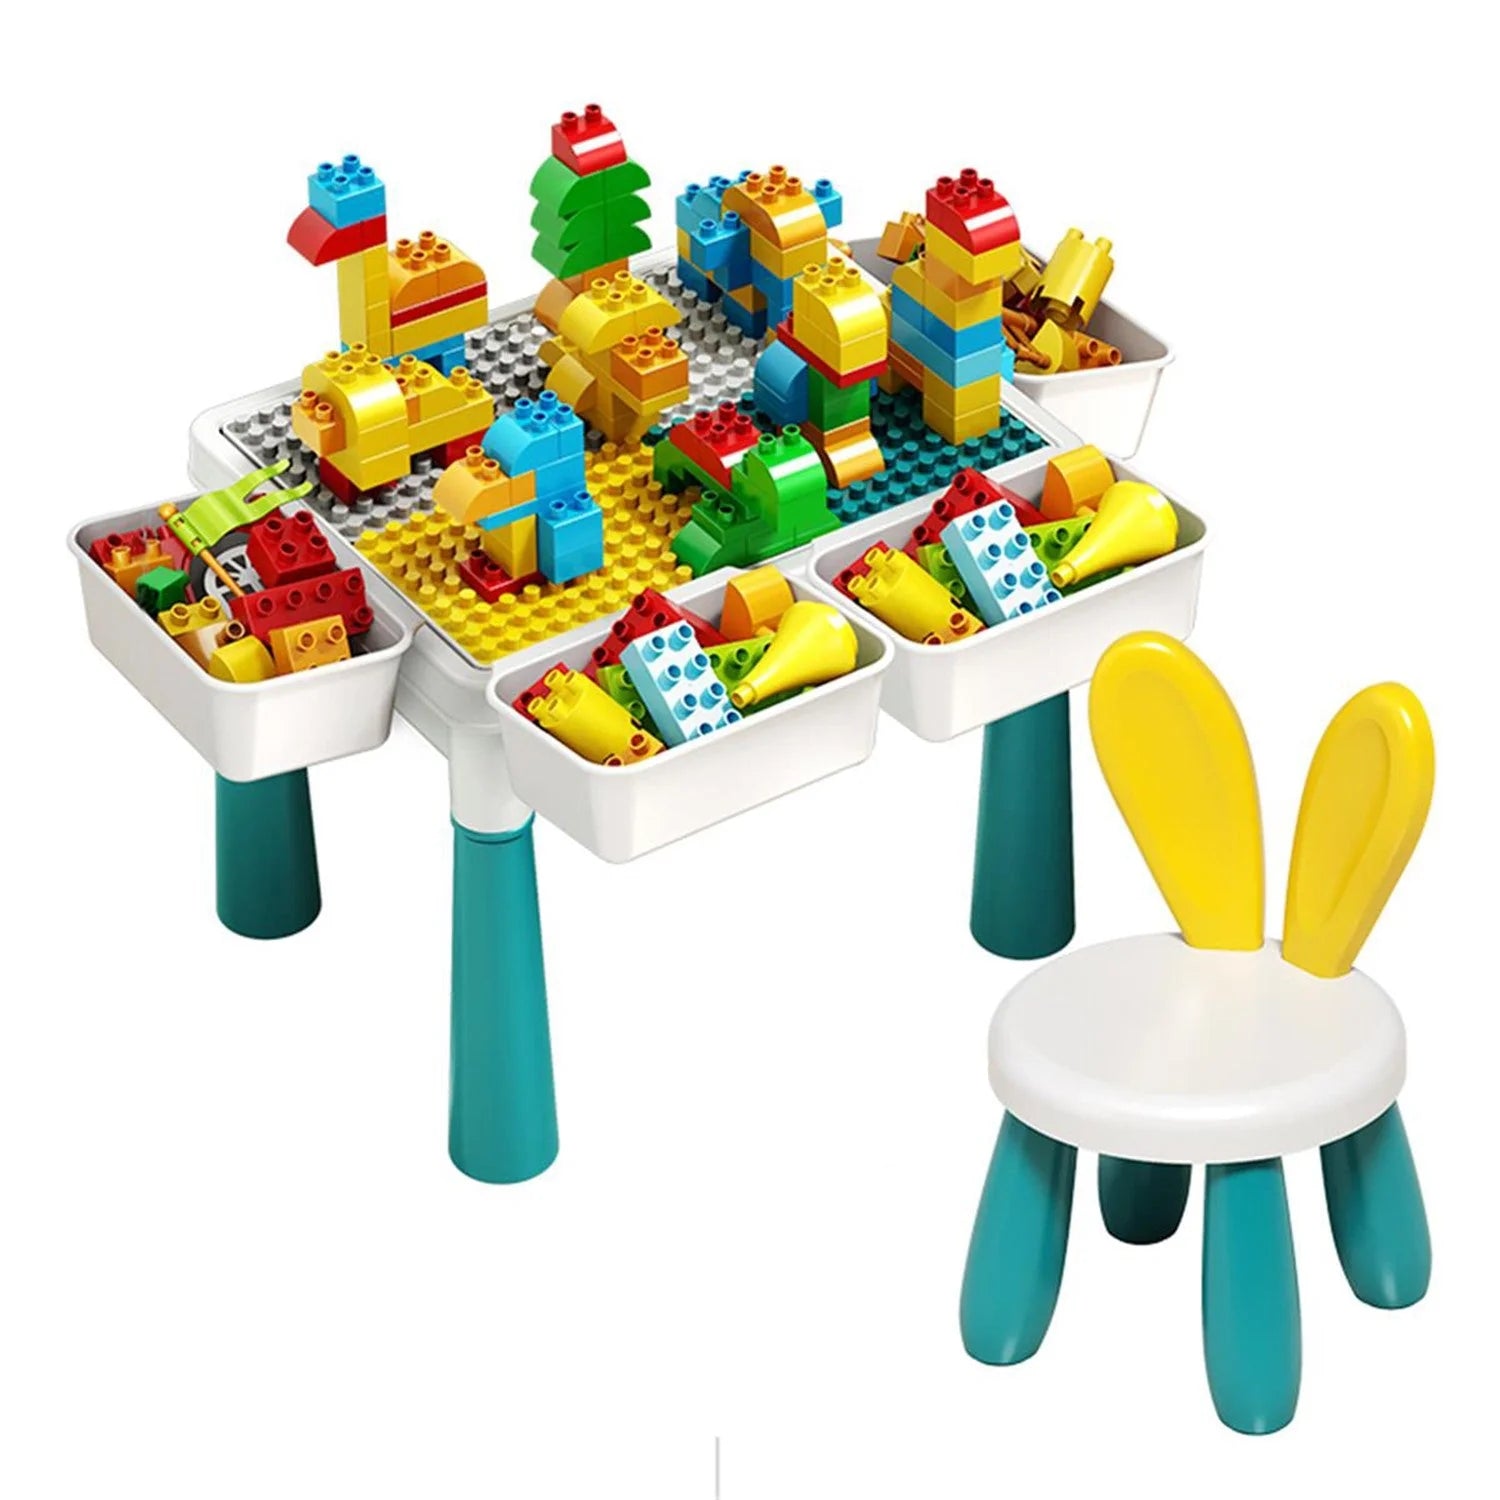 Multipurpose Big Building Blocks Learning Study Drawing Playing Table 1 x table